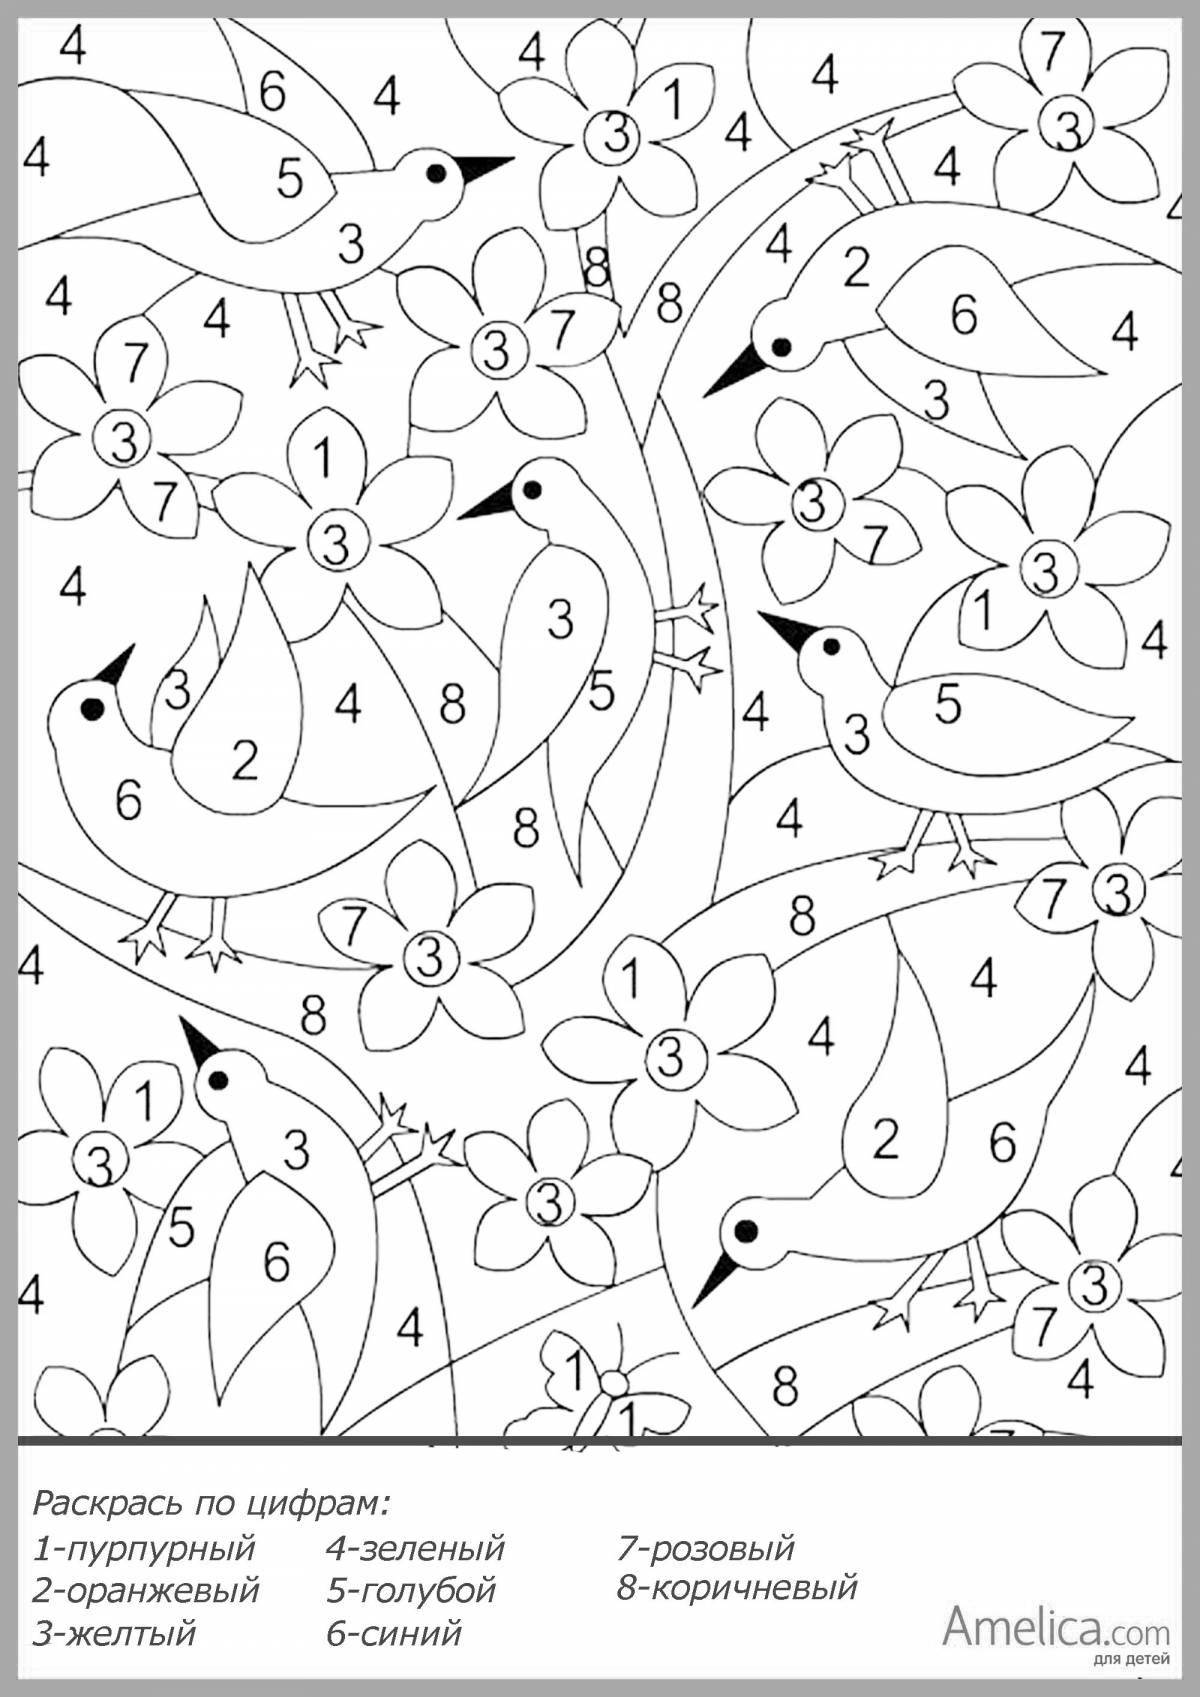 Color-frenzy coloring by numbers up to 4